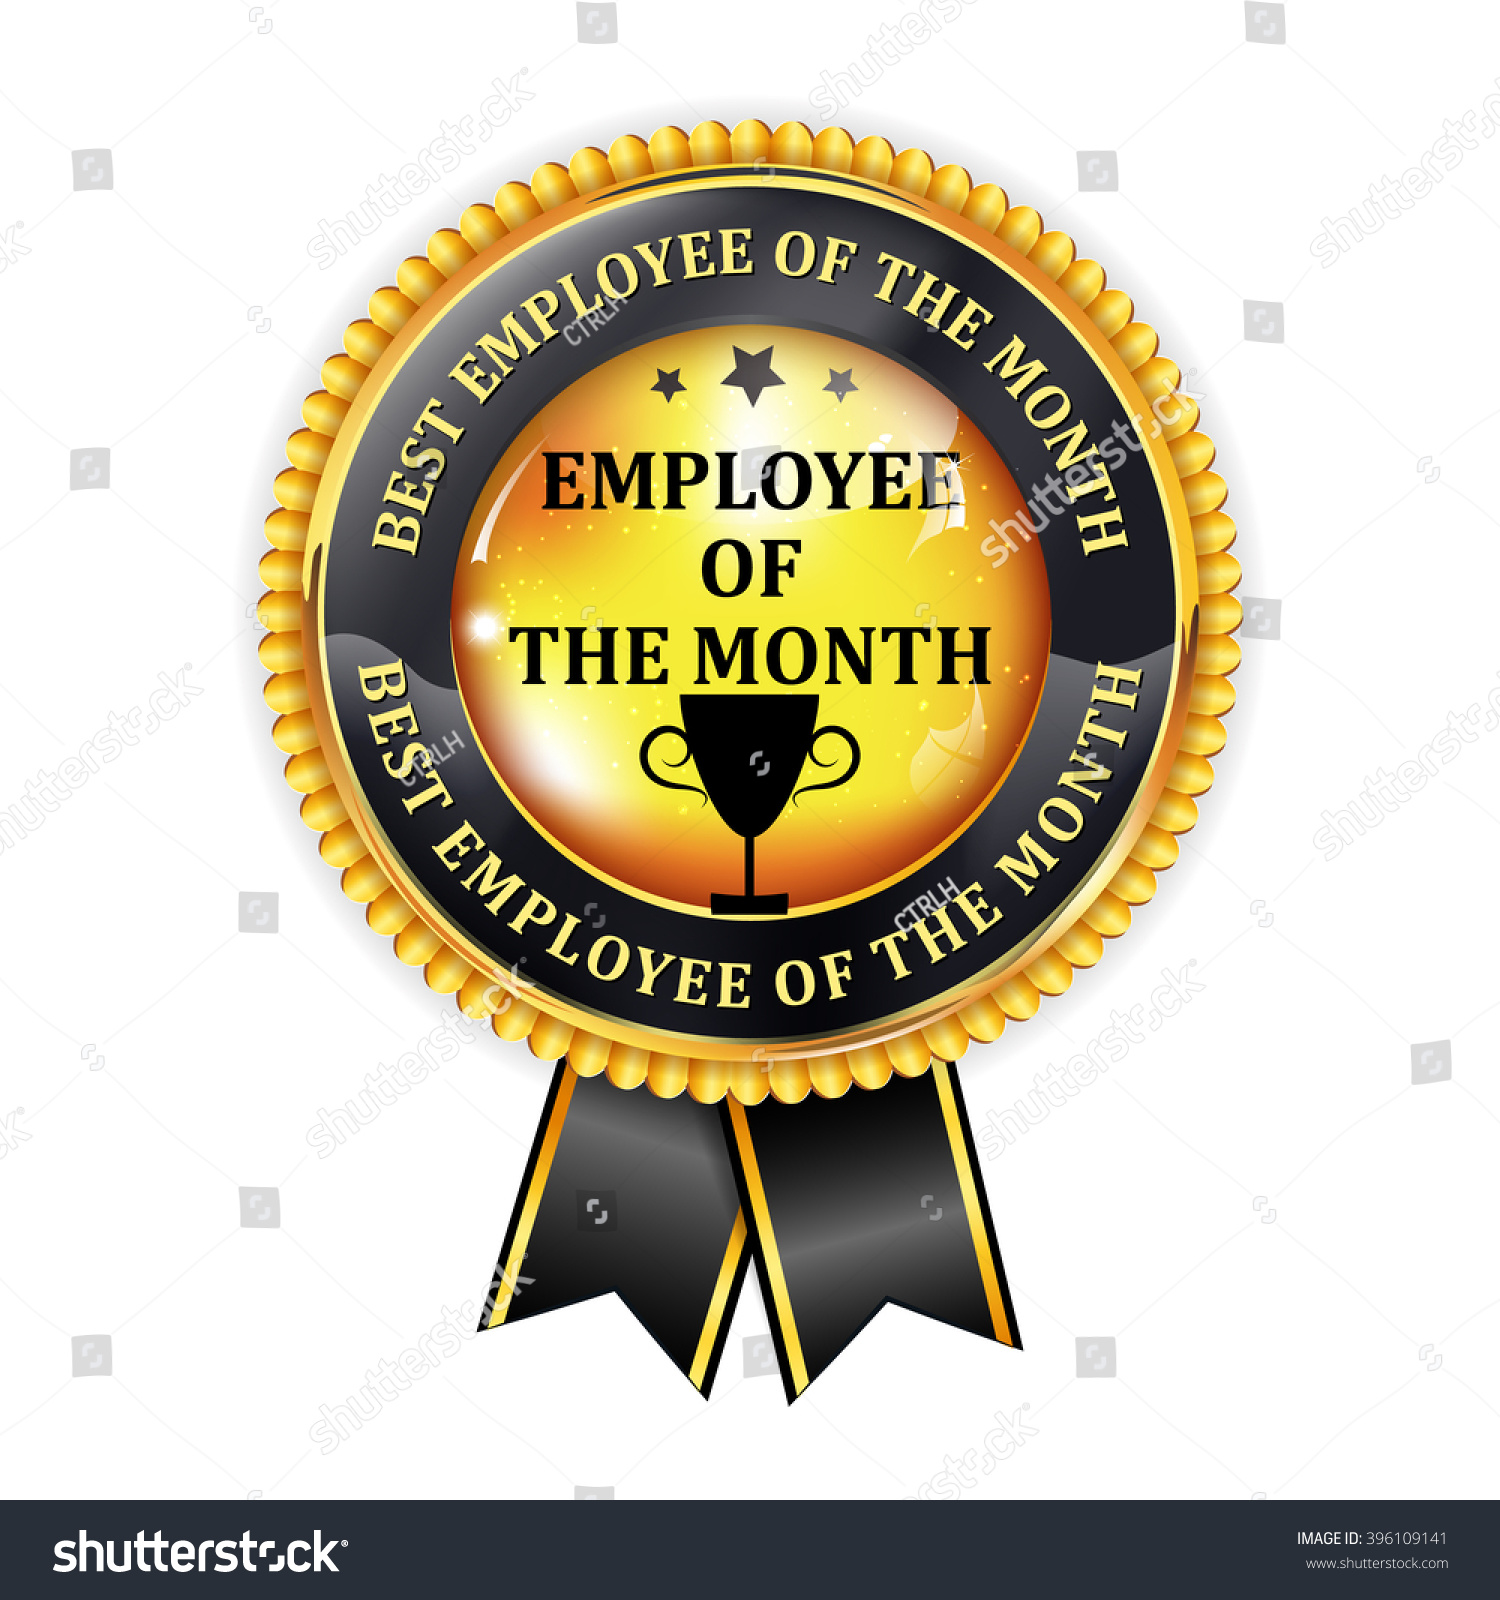 free clipart employee of the month - photo #46